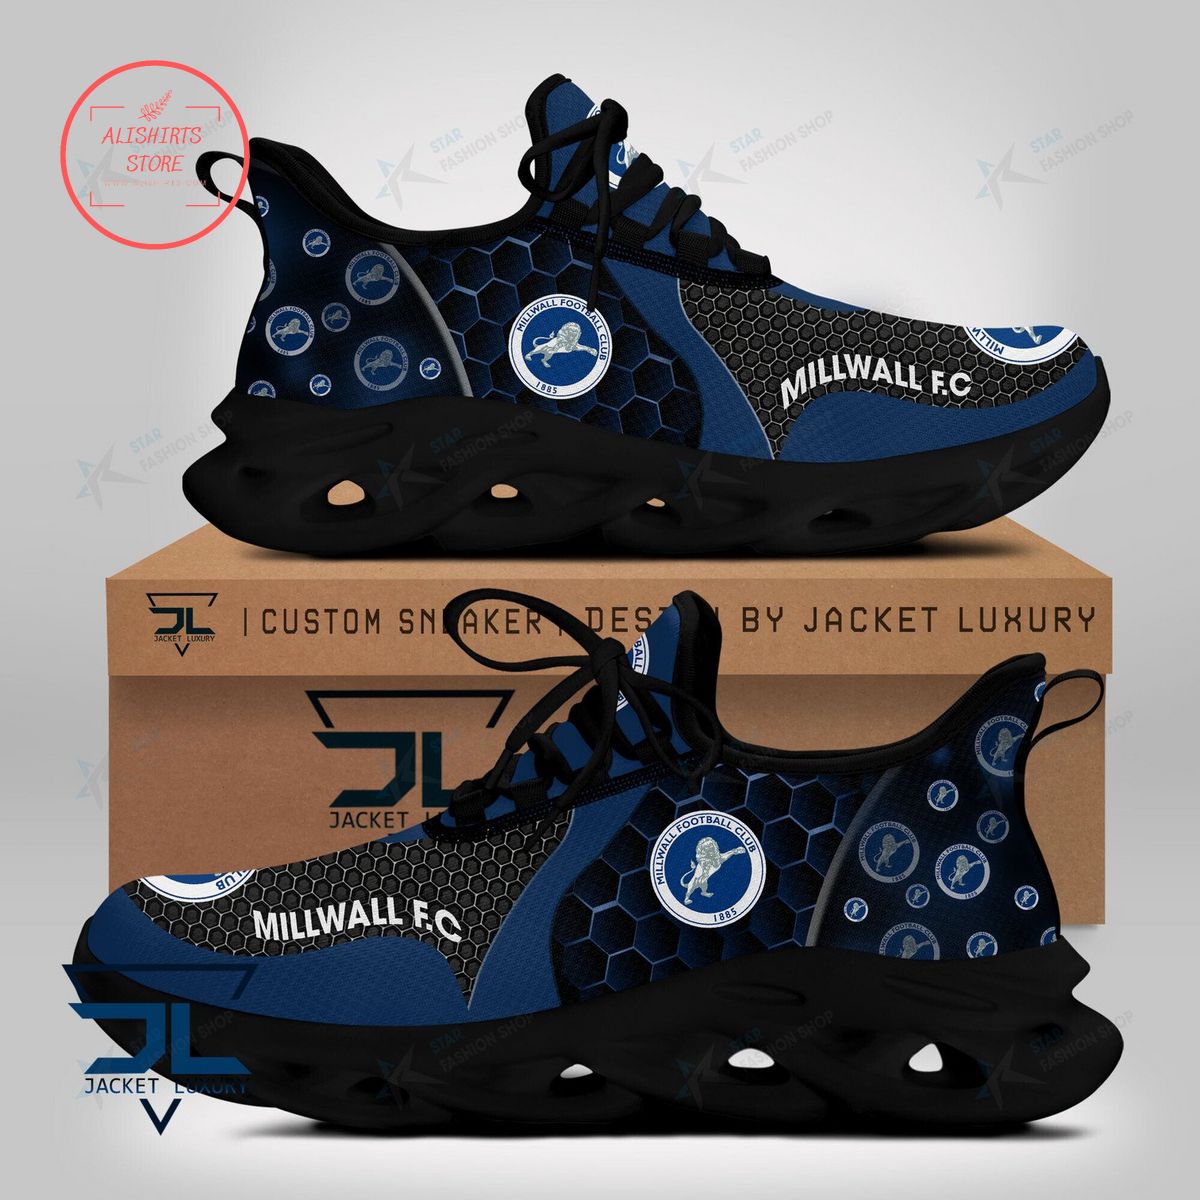 Millwall FC Max Soul Sneaker Shoes